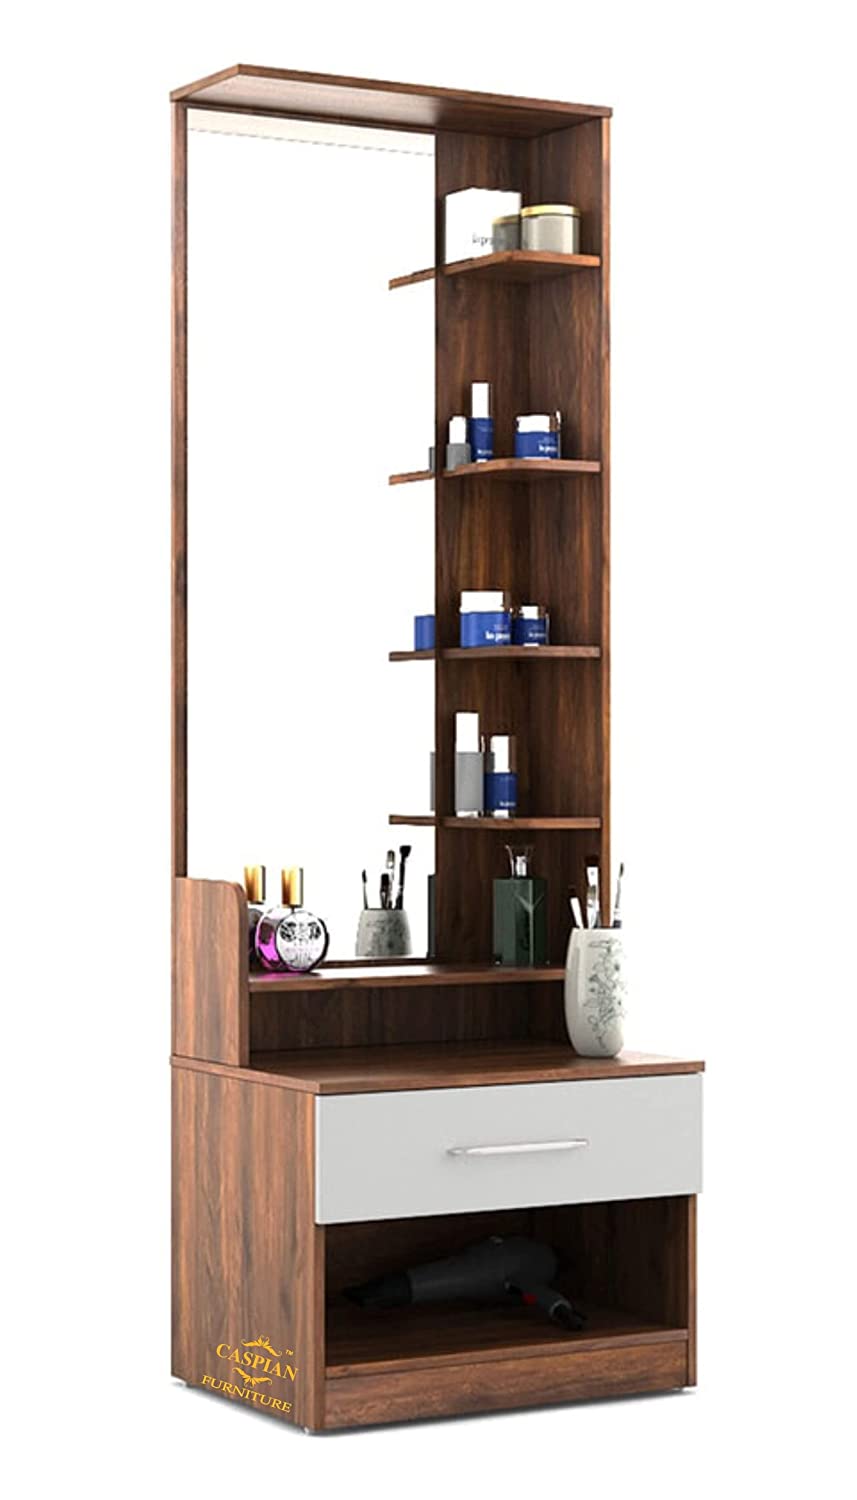 Dressing Table with Shelves and Drawer || Make up Table|| Organizer for Room Engineered Wood Dressing Table (Walnut Brown & White)